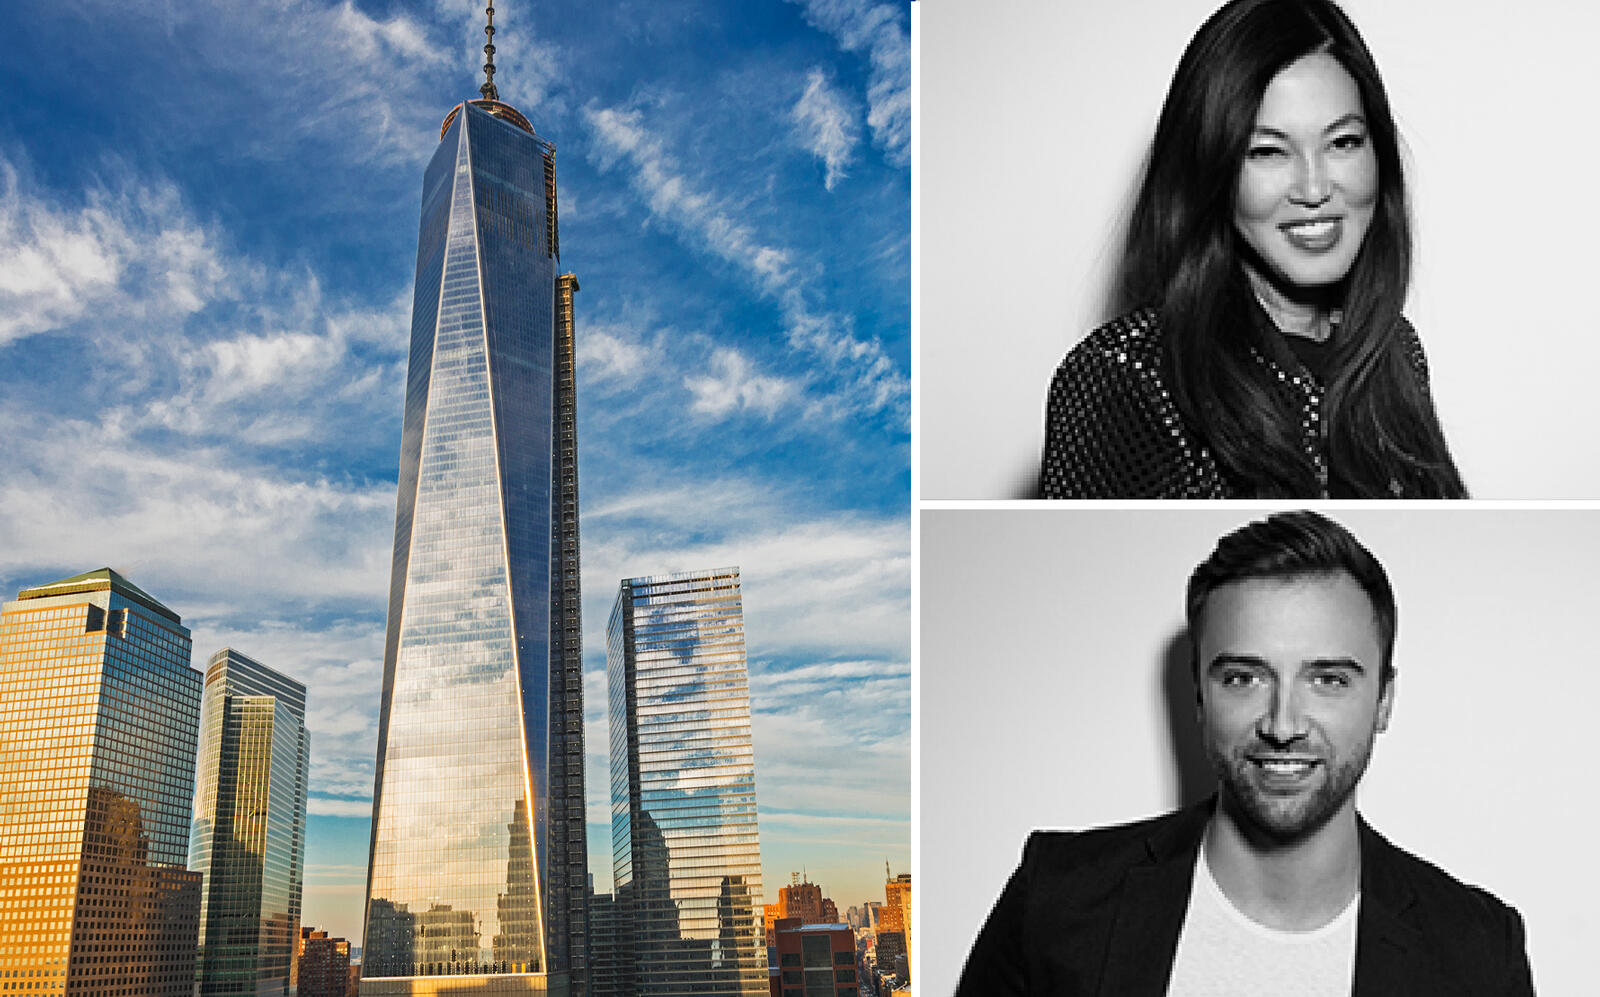 One World Trade Center with Constellation Agency co-founders Diana Lee and Matt Woodruff (iStock, Constellation Agency)